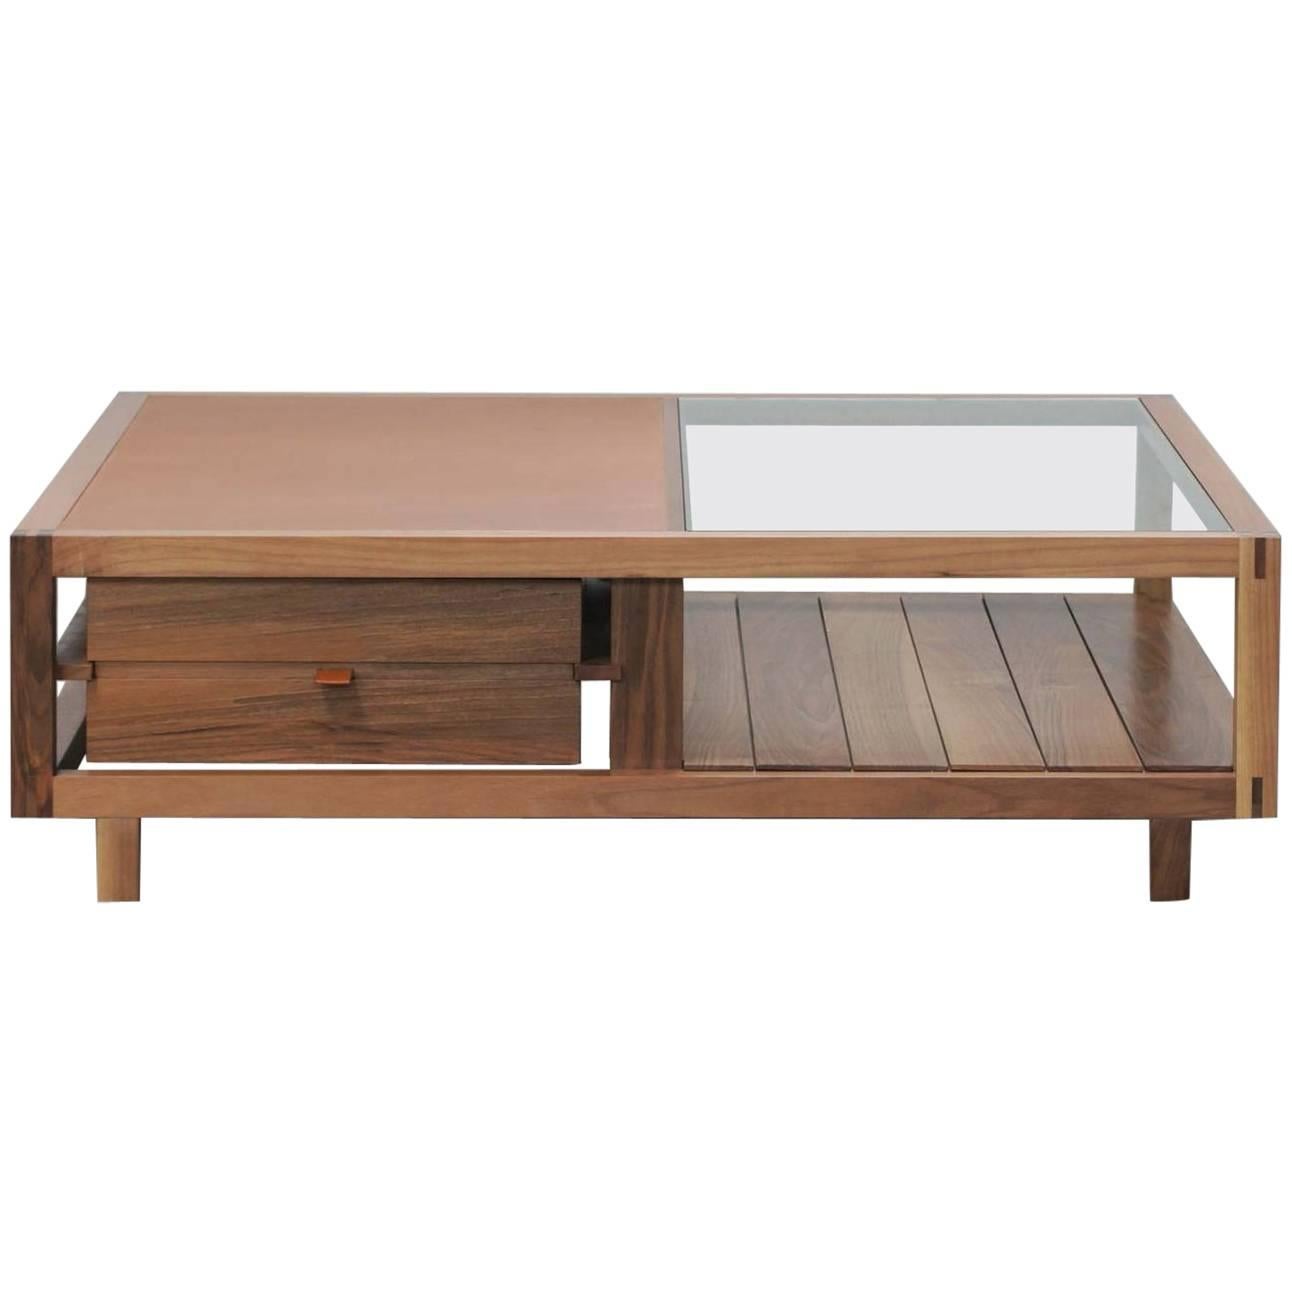 "Optimum" Walnut Low Coffee Table Designed by Stephane Lebrun for Dessie For Sale